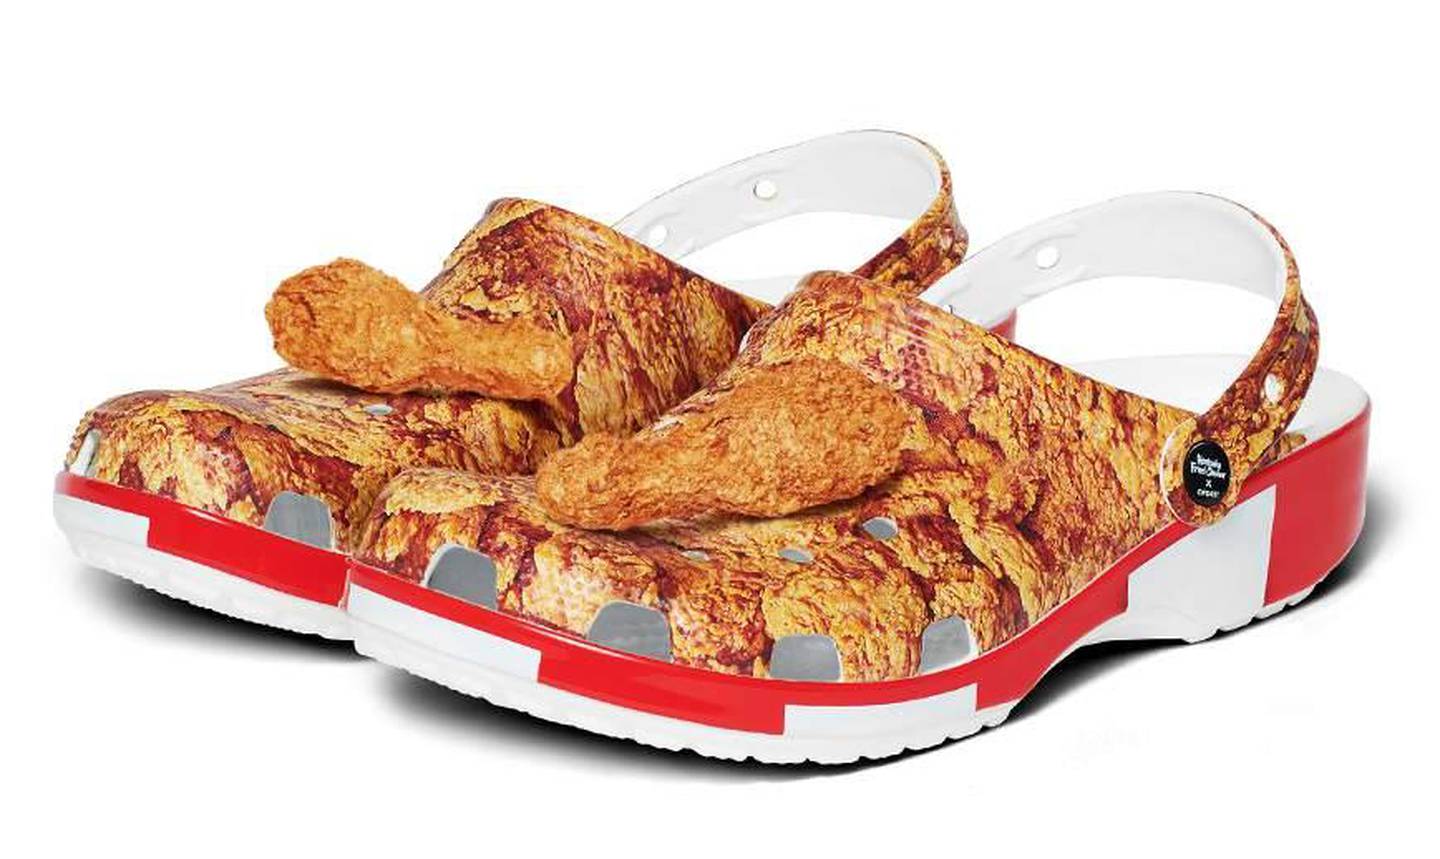 The sold-out Crocs made in collaboration with KFC. Crocs